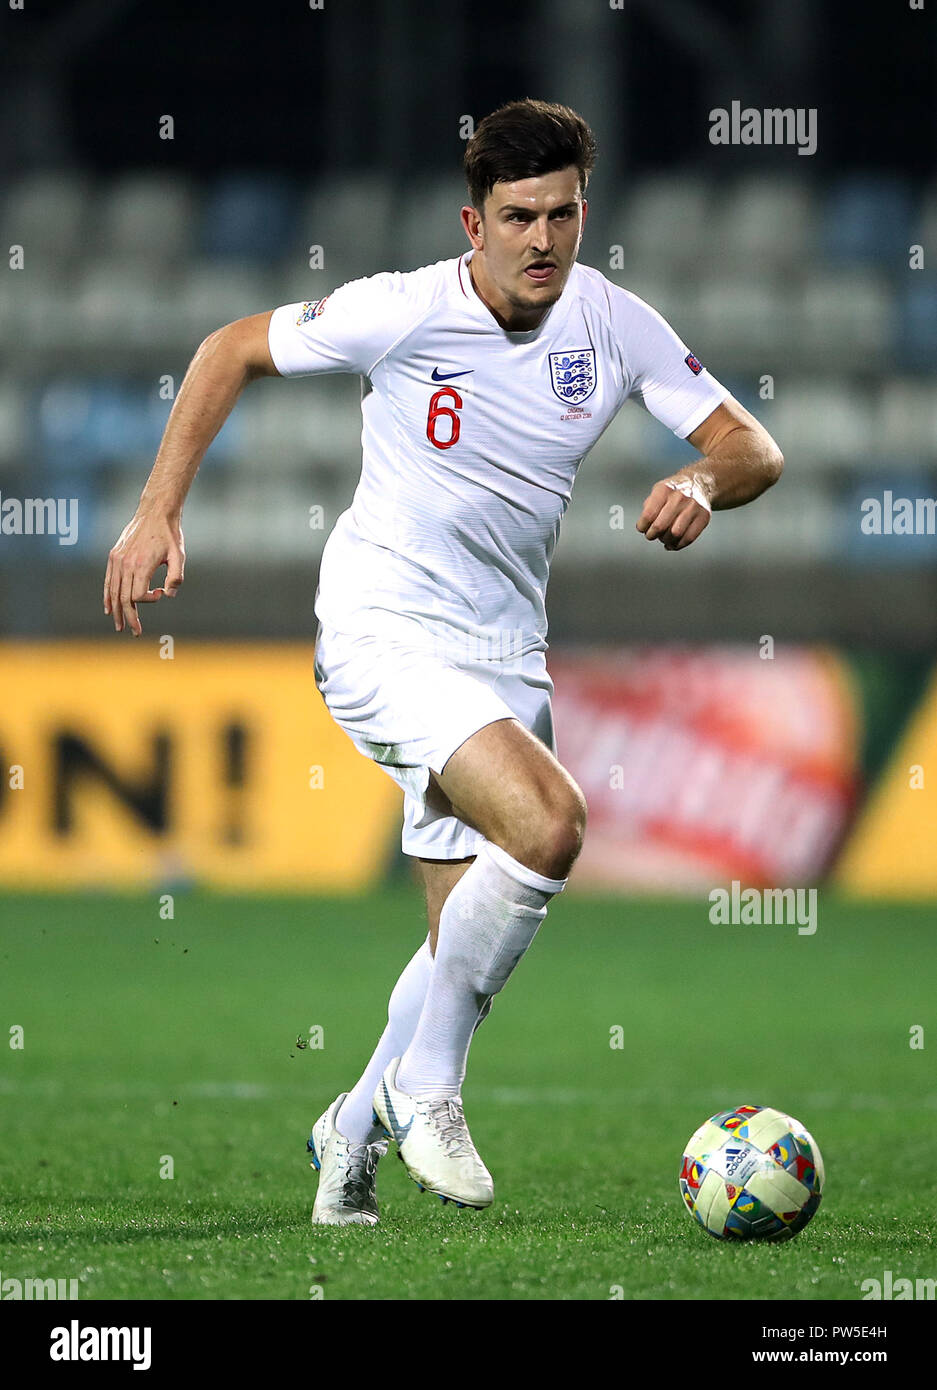 England's Harry Maguire during the UEFA Nations League match at Stadion HNK Rijeka in Croatia. PRESS ASSOCIATION Photo. Picture date: Friday October 12, 2018. See PA story SOCCER Croatia. Photo credit should read: Tim Goode/PA Wire. Stock Photo